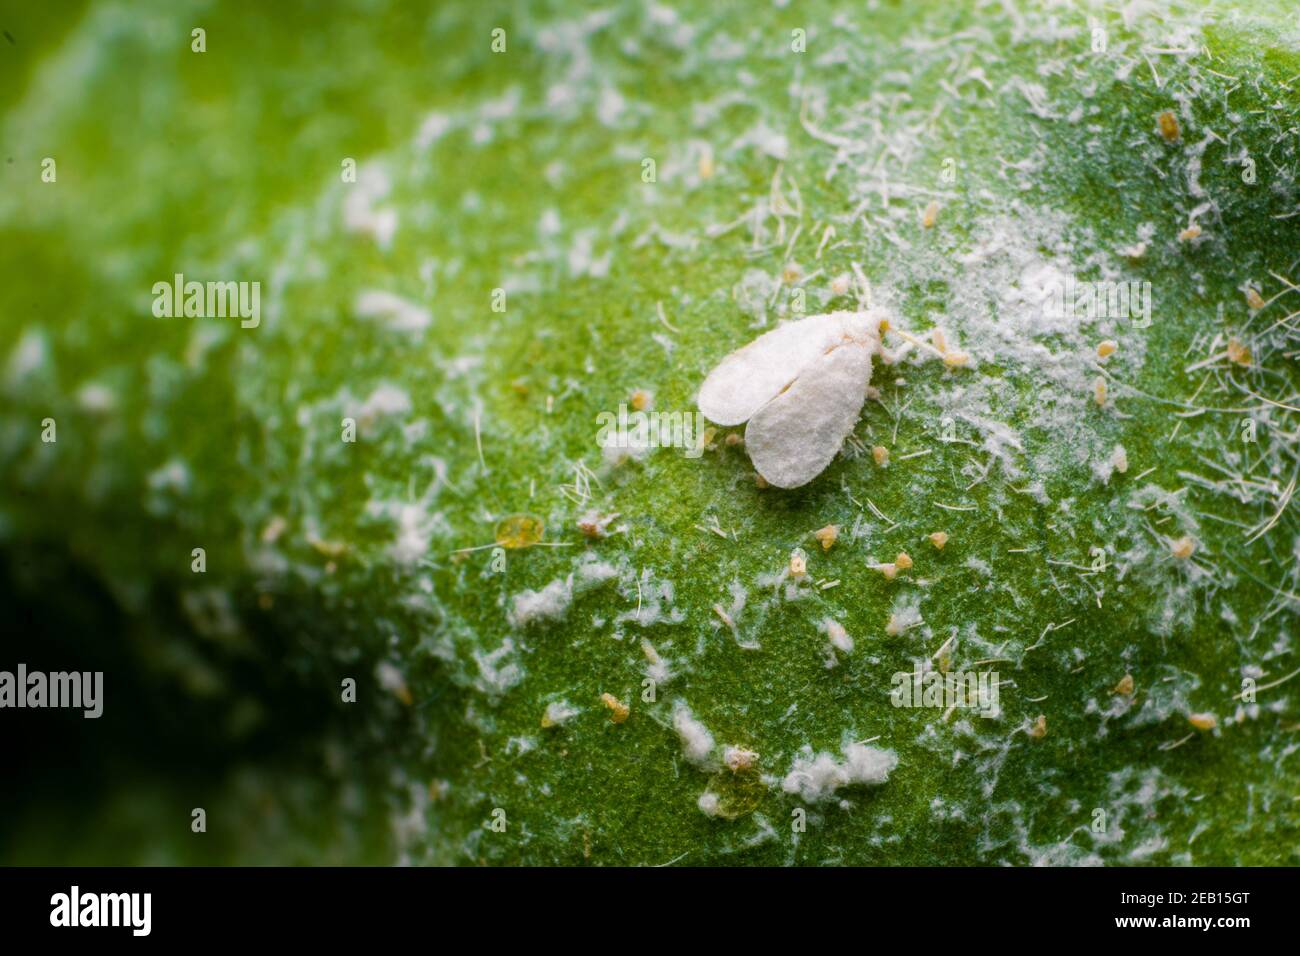 White fly is a pest which various crop plants. These are sucking pest which affects the yield of the crops. Stock Photo